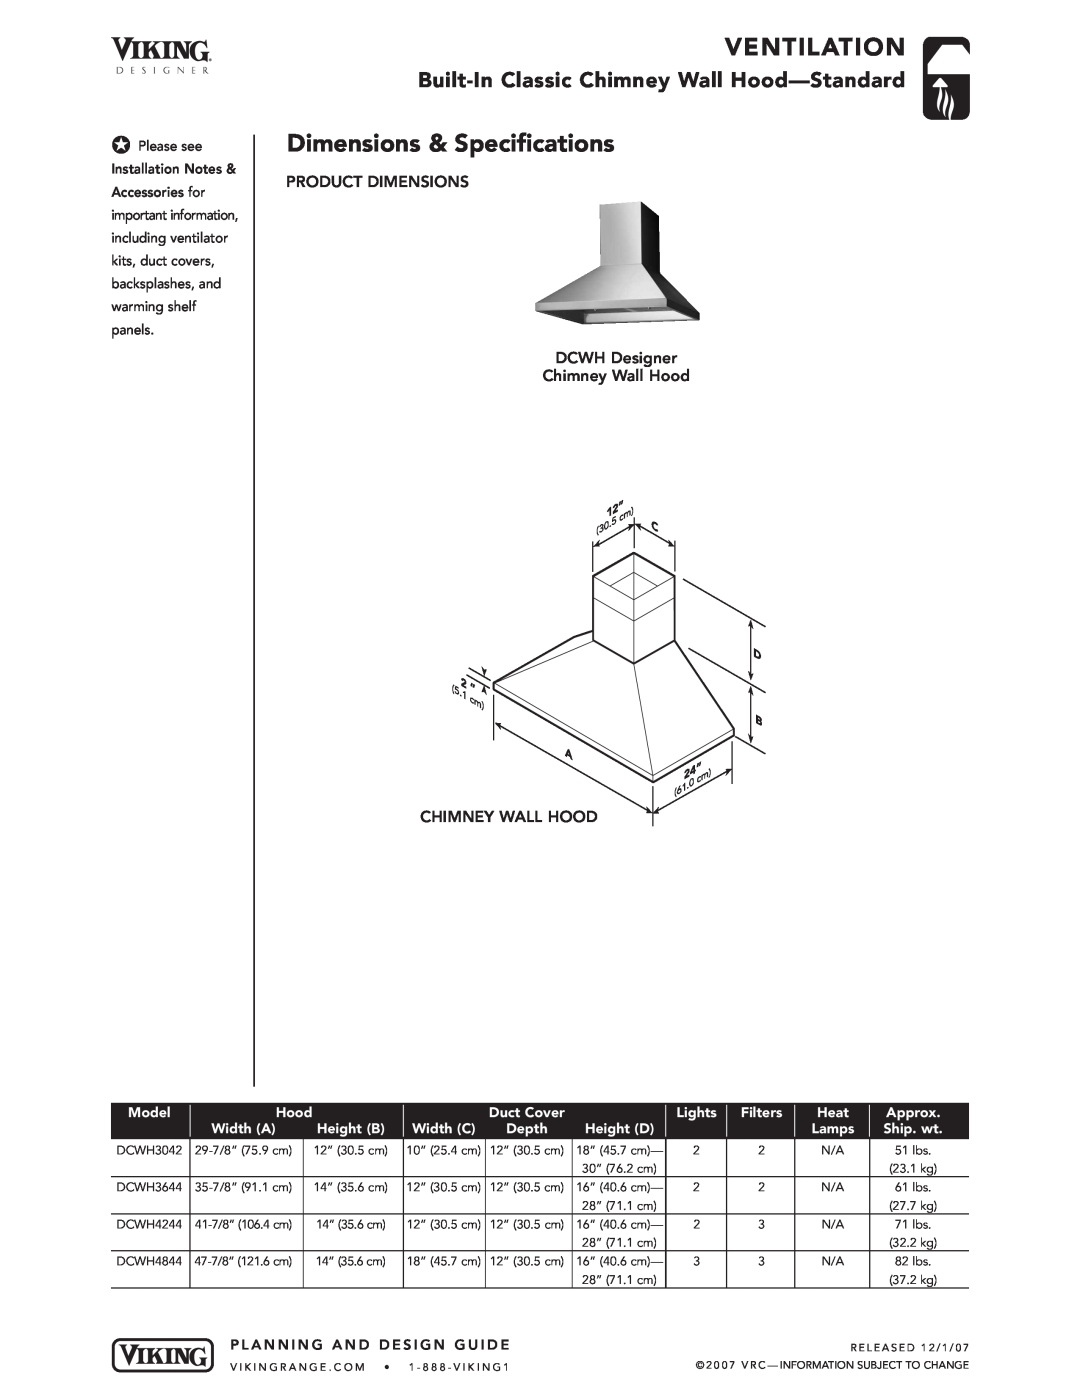 Viking DCWH, DCWN, DCWL dimensions Dimensions & Specifications, Built-In Classic Chimney Wall Hood-Standard, Ventilation 